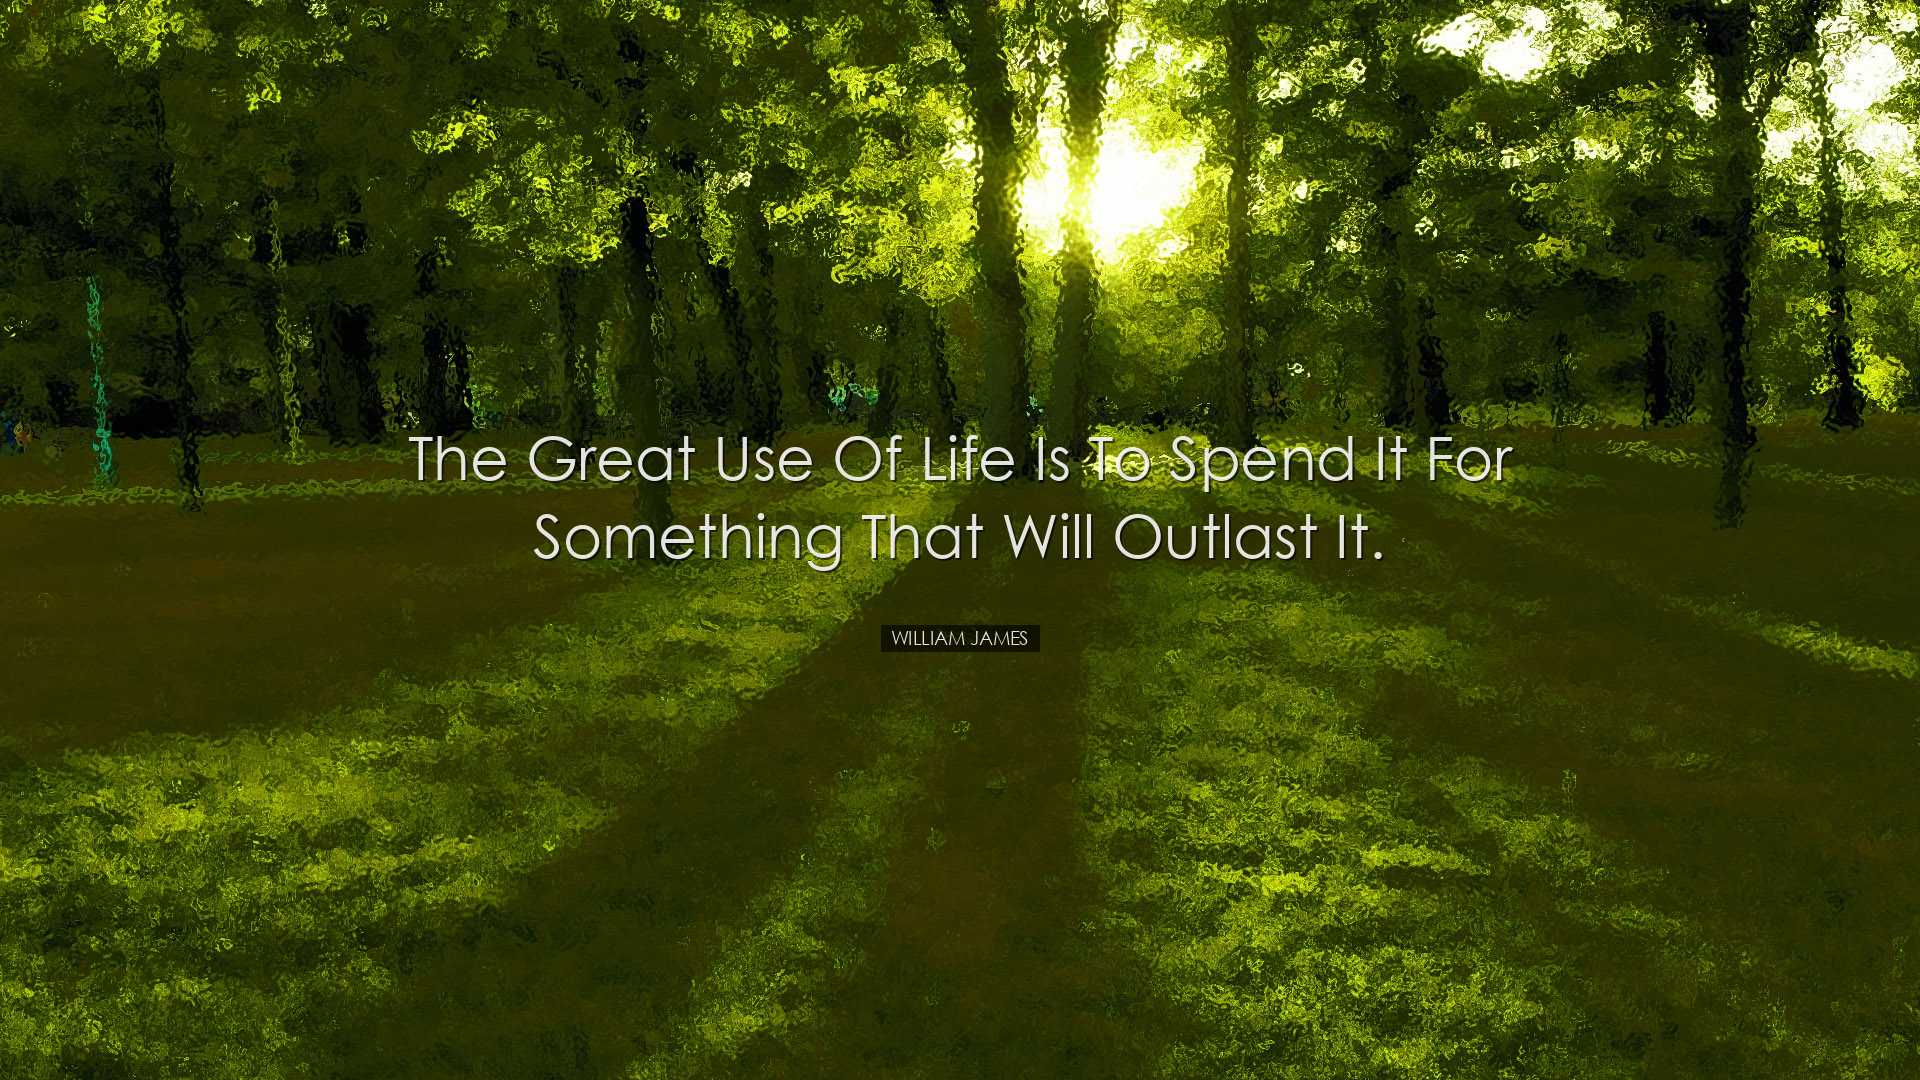 The great use of life is to spend it for something that will outla